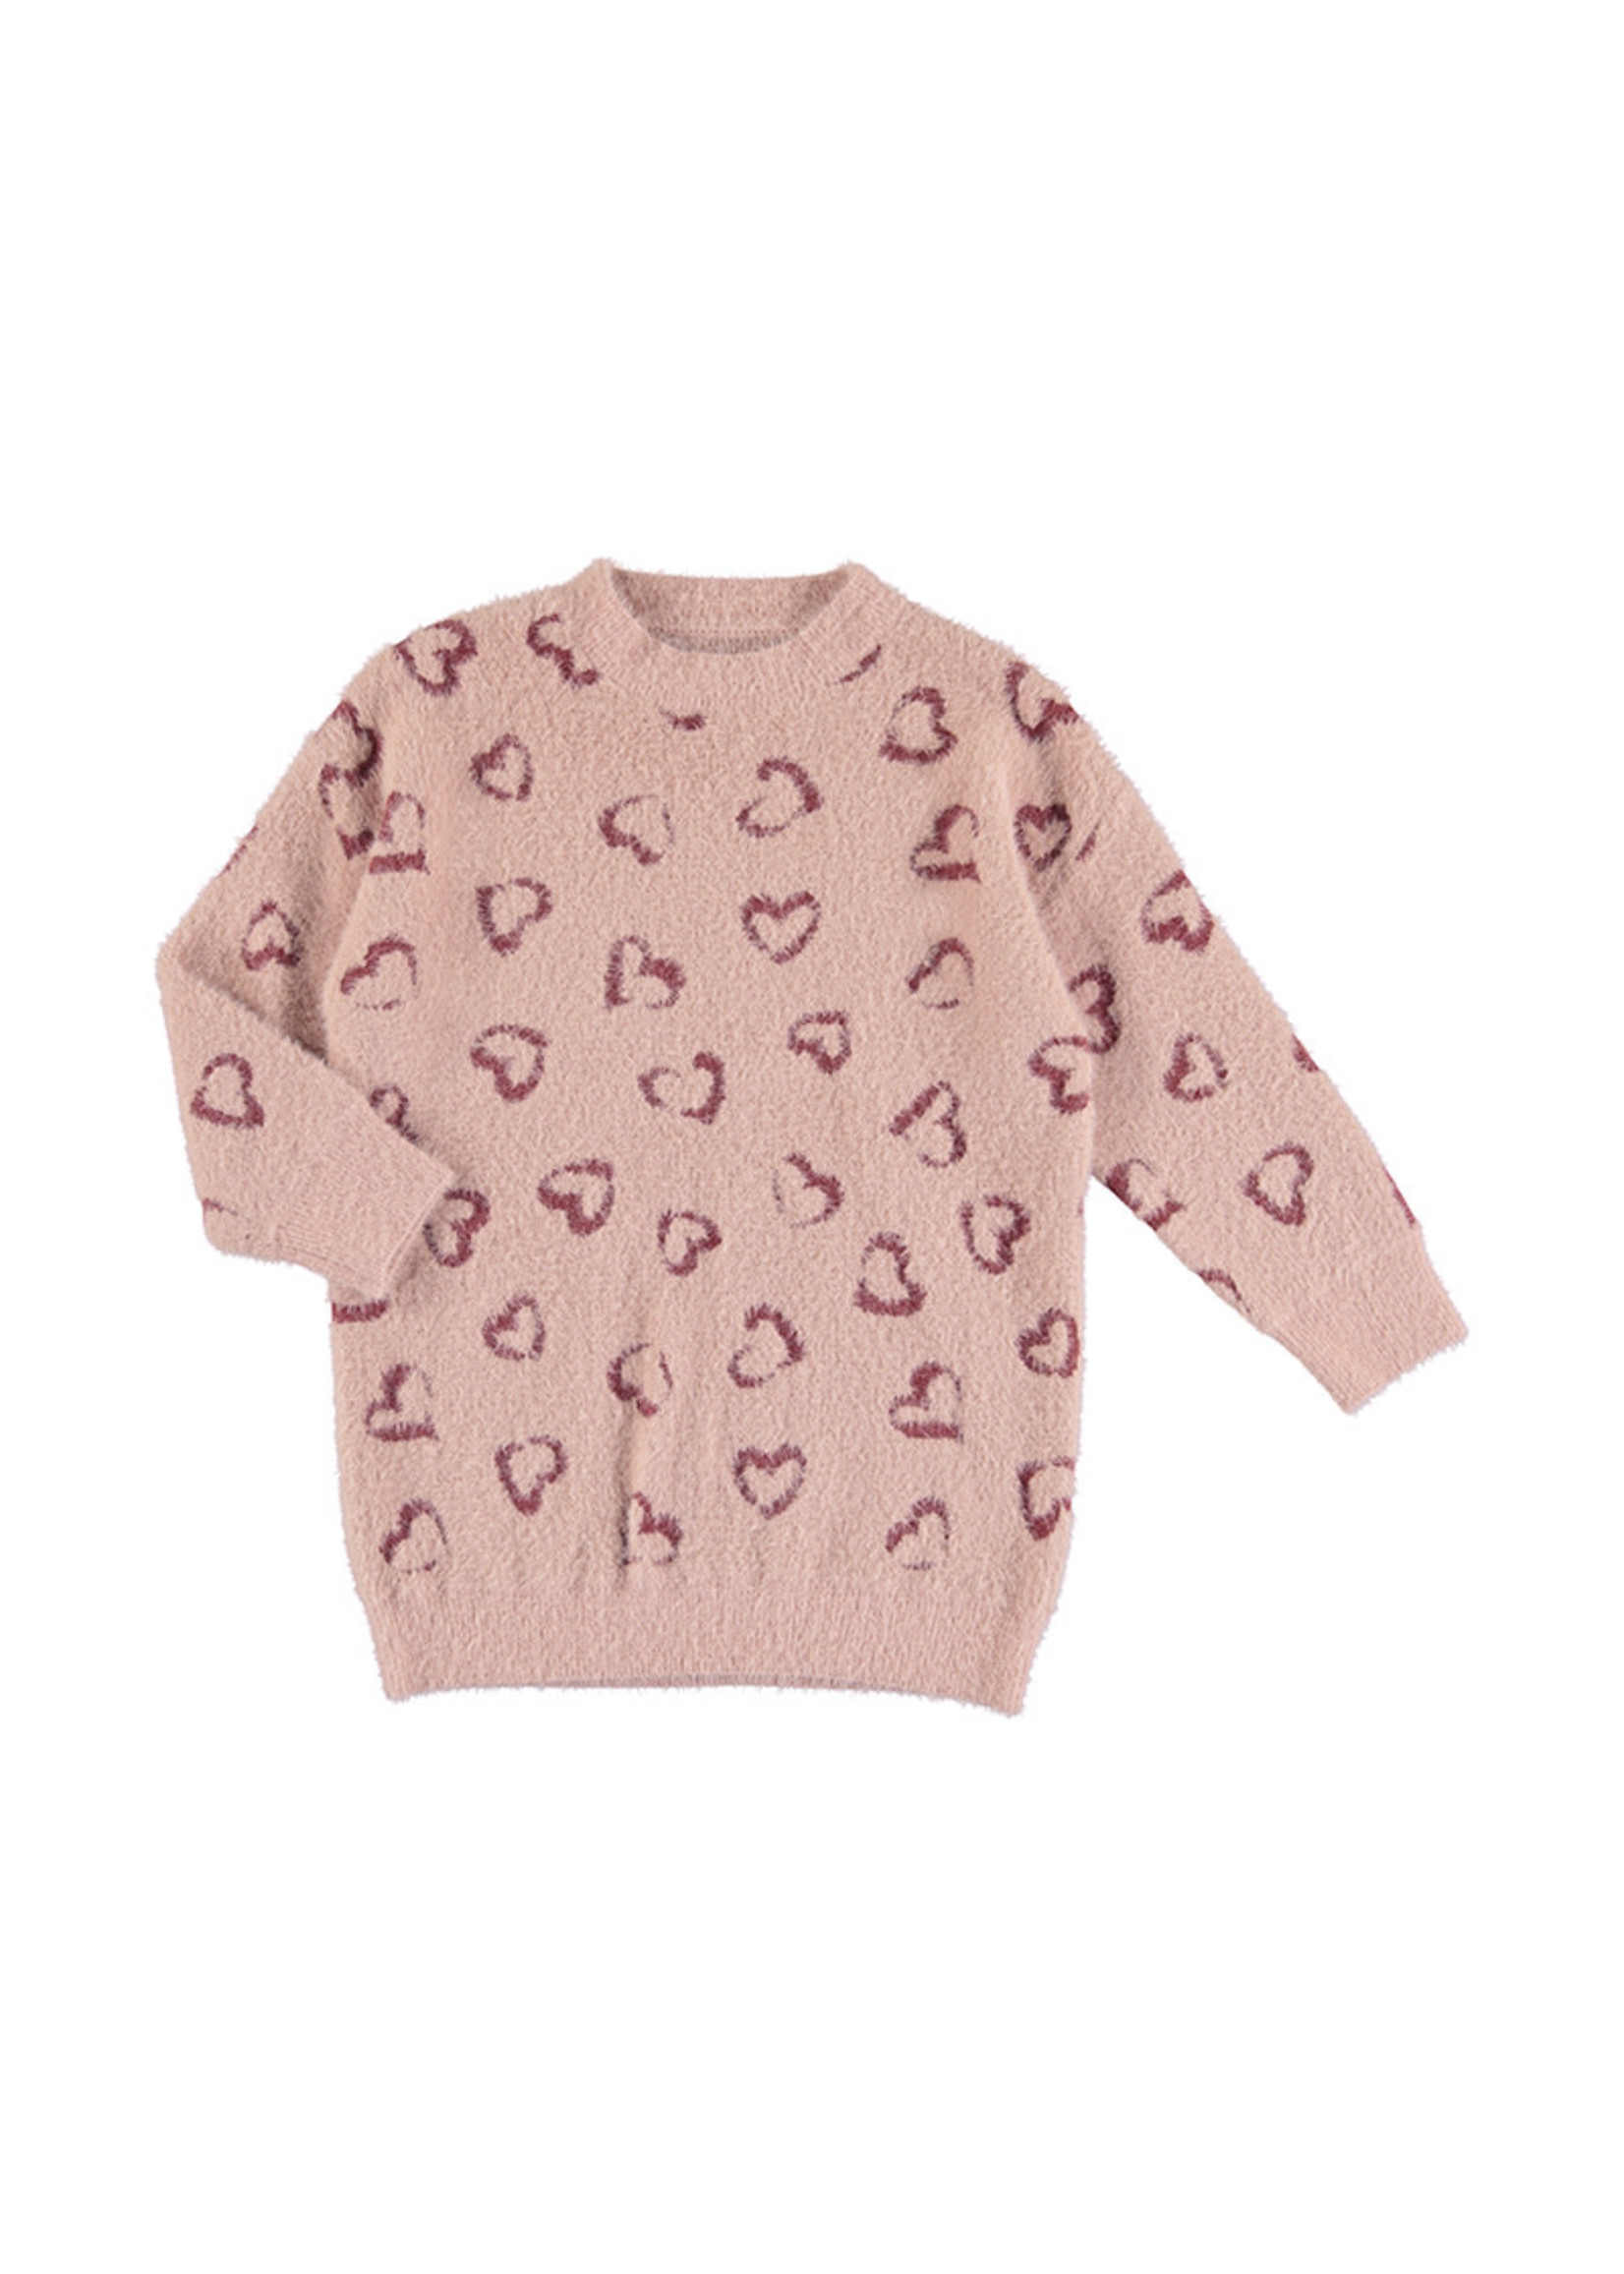 Mayoral Pink Heart Sweater Dress